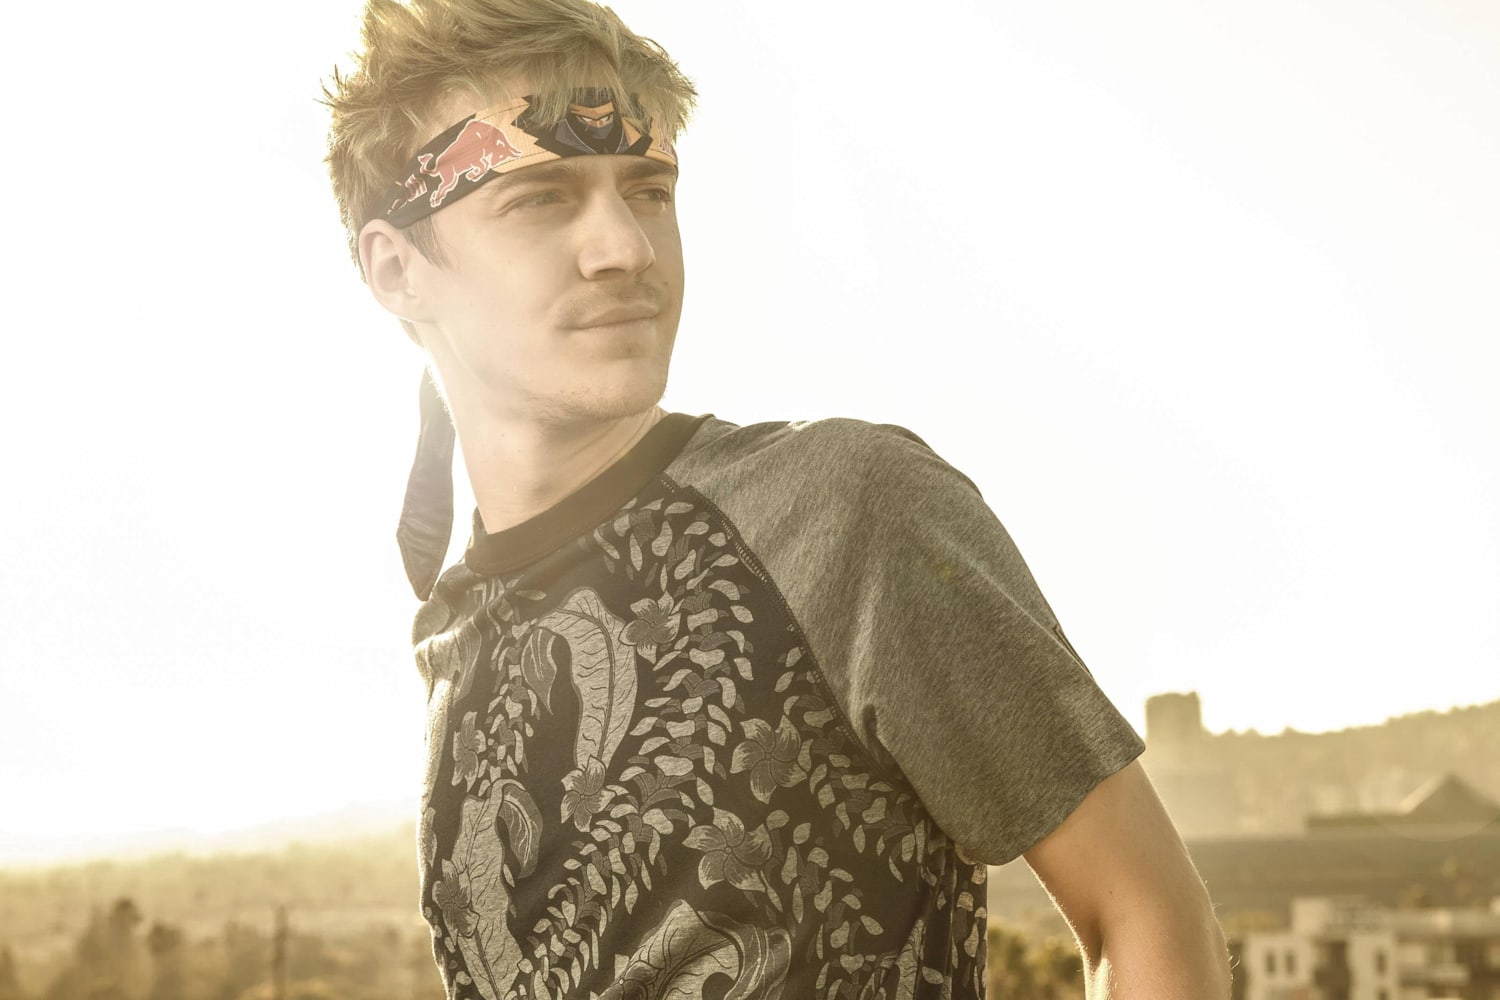 Ninja’s New Year's Eve stream What you need to know